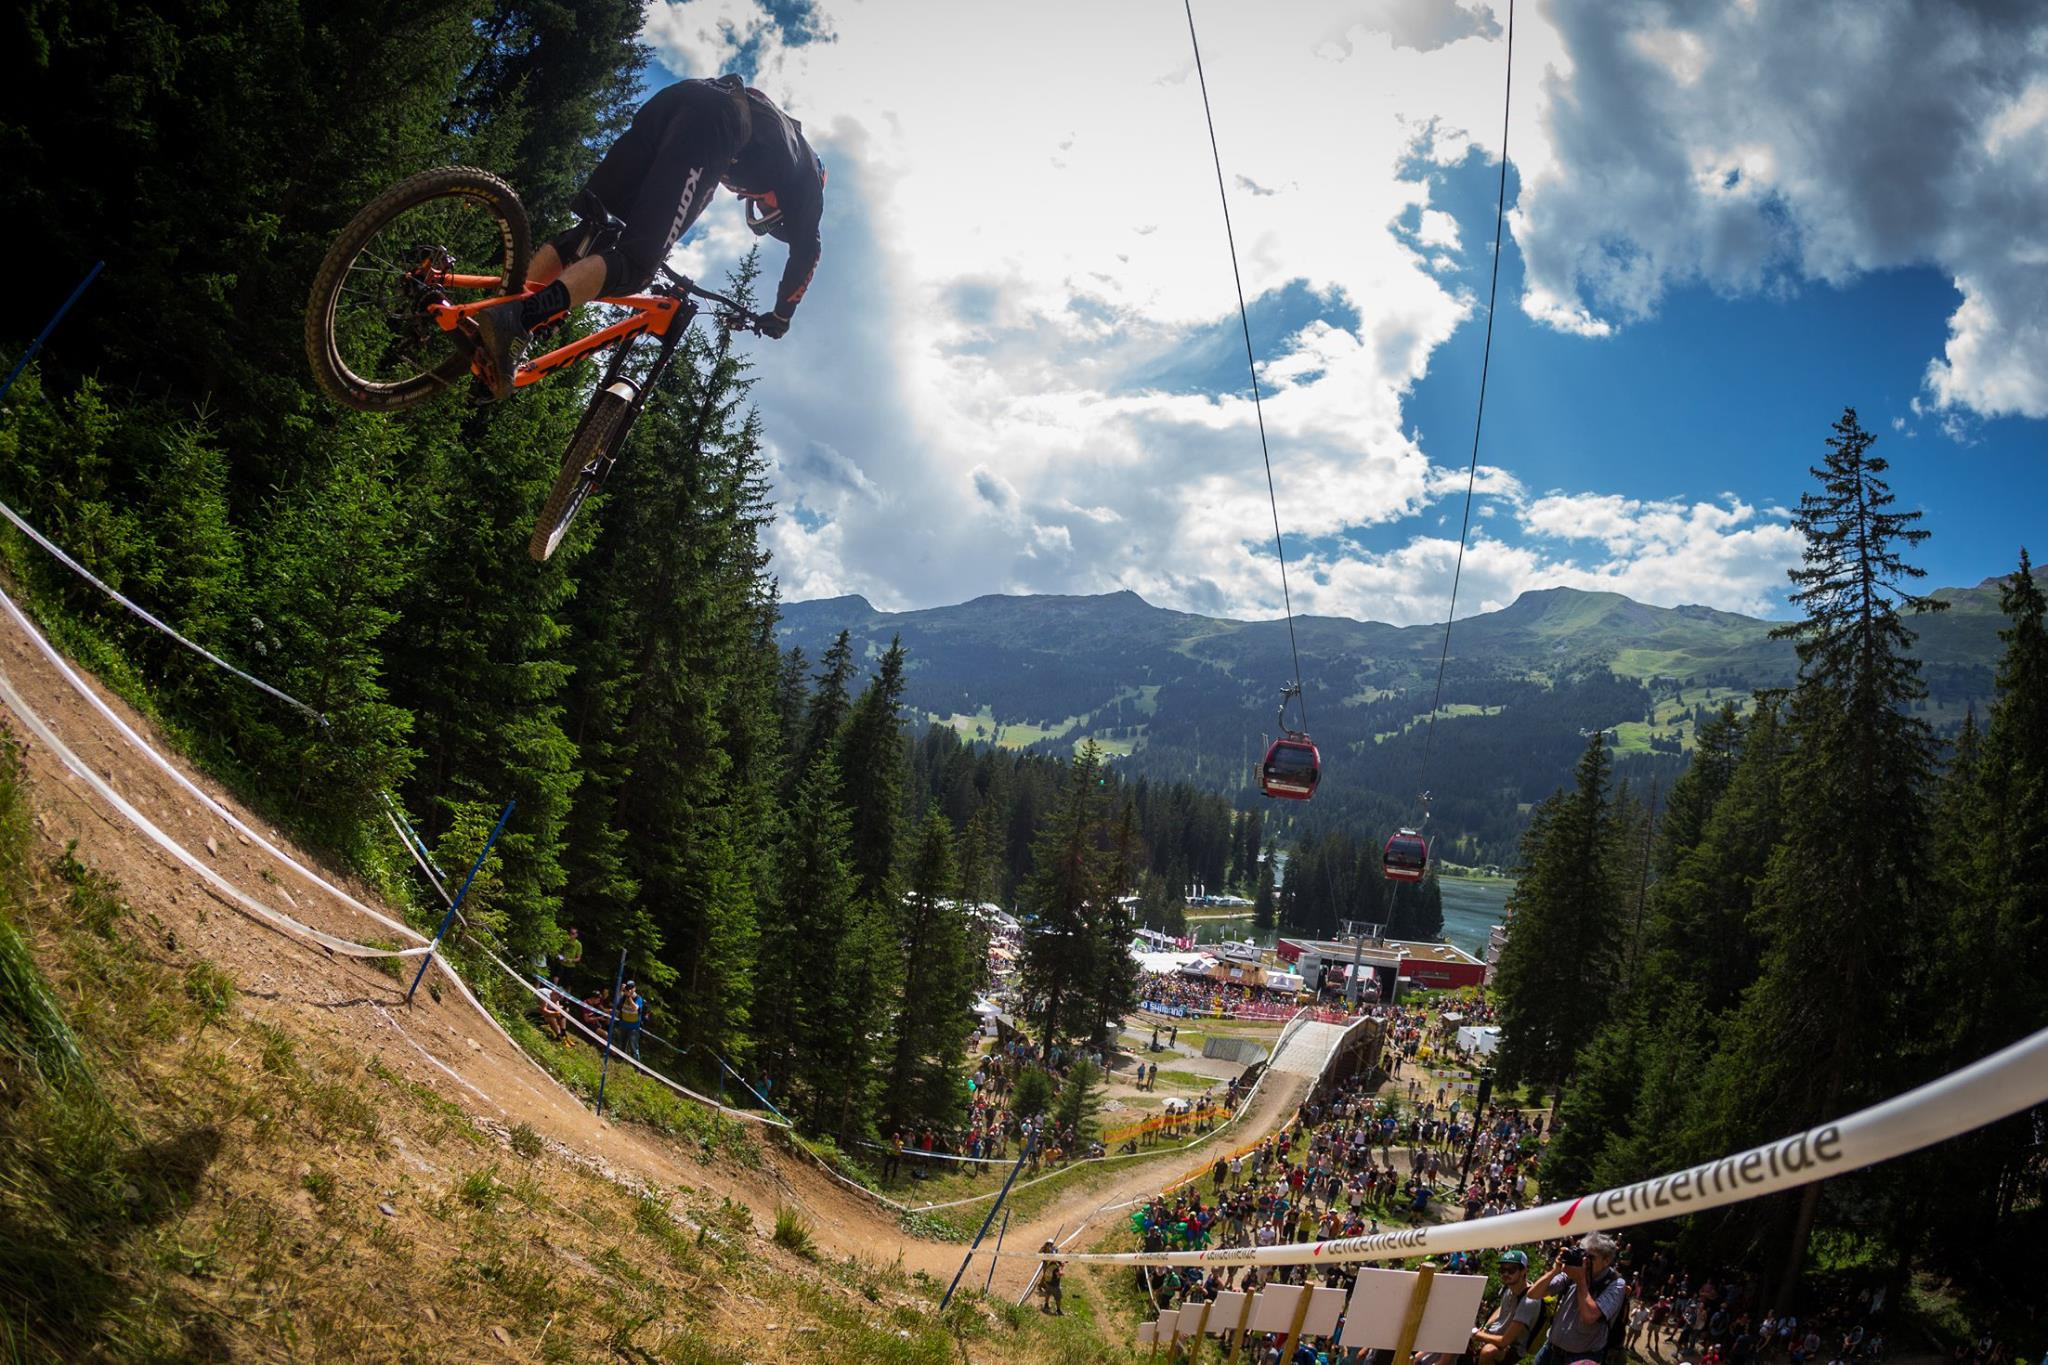 British riders Rachel Atherton and Tahnée Seagrave are favourites in the women's elite downhill event that will take place on the last day of the UCI Mountain Bike World Championships starting at Lenzerheide, pictured, in Switzerland ©UCI